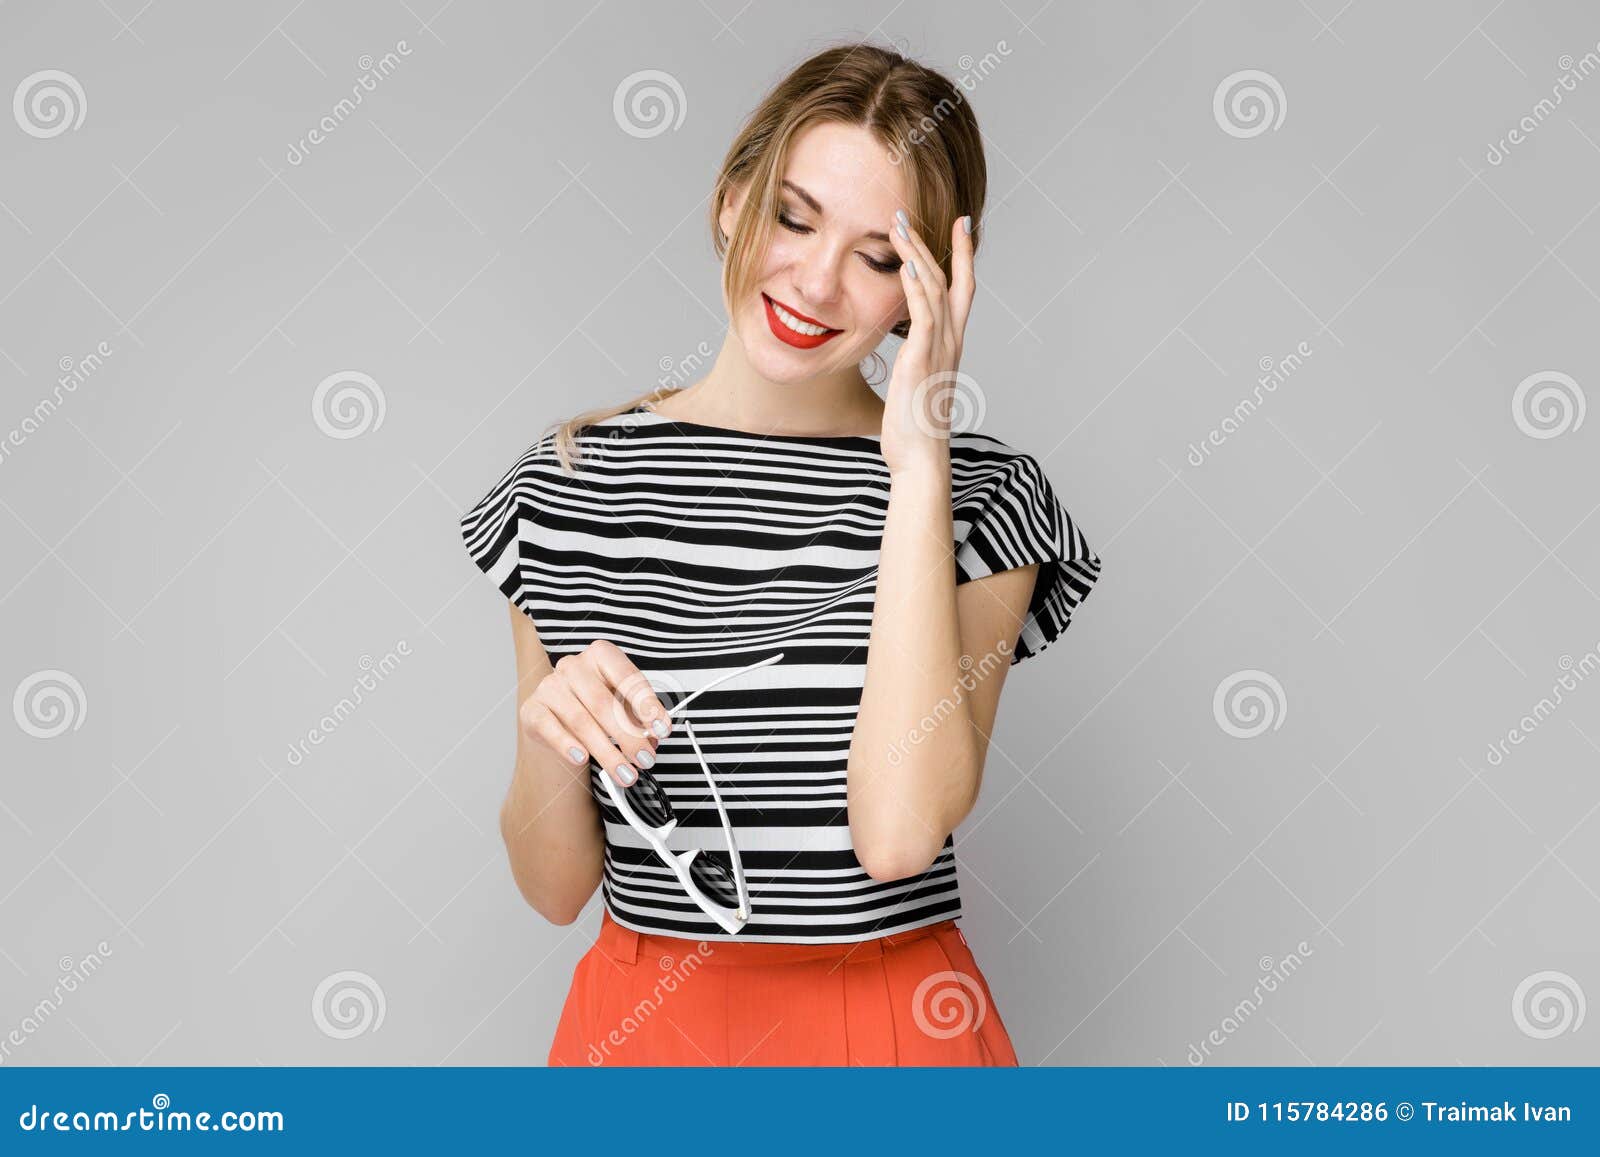 Attractive Young Blonde Shy Girl in Striped Blouse Smiling Holding Her ...